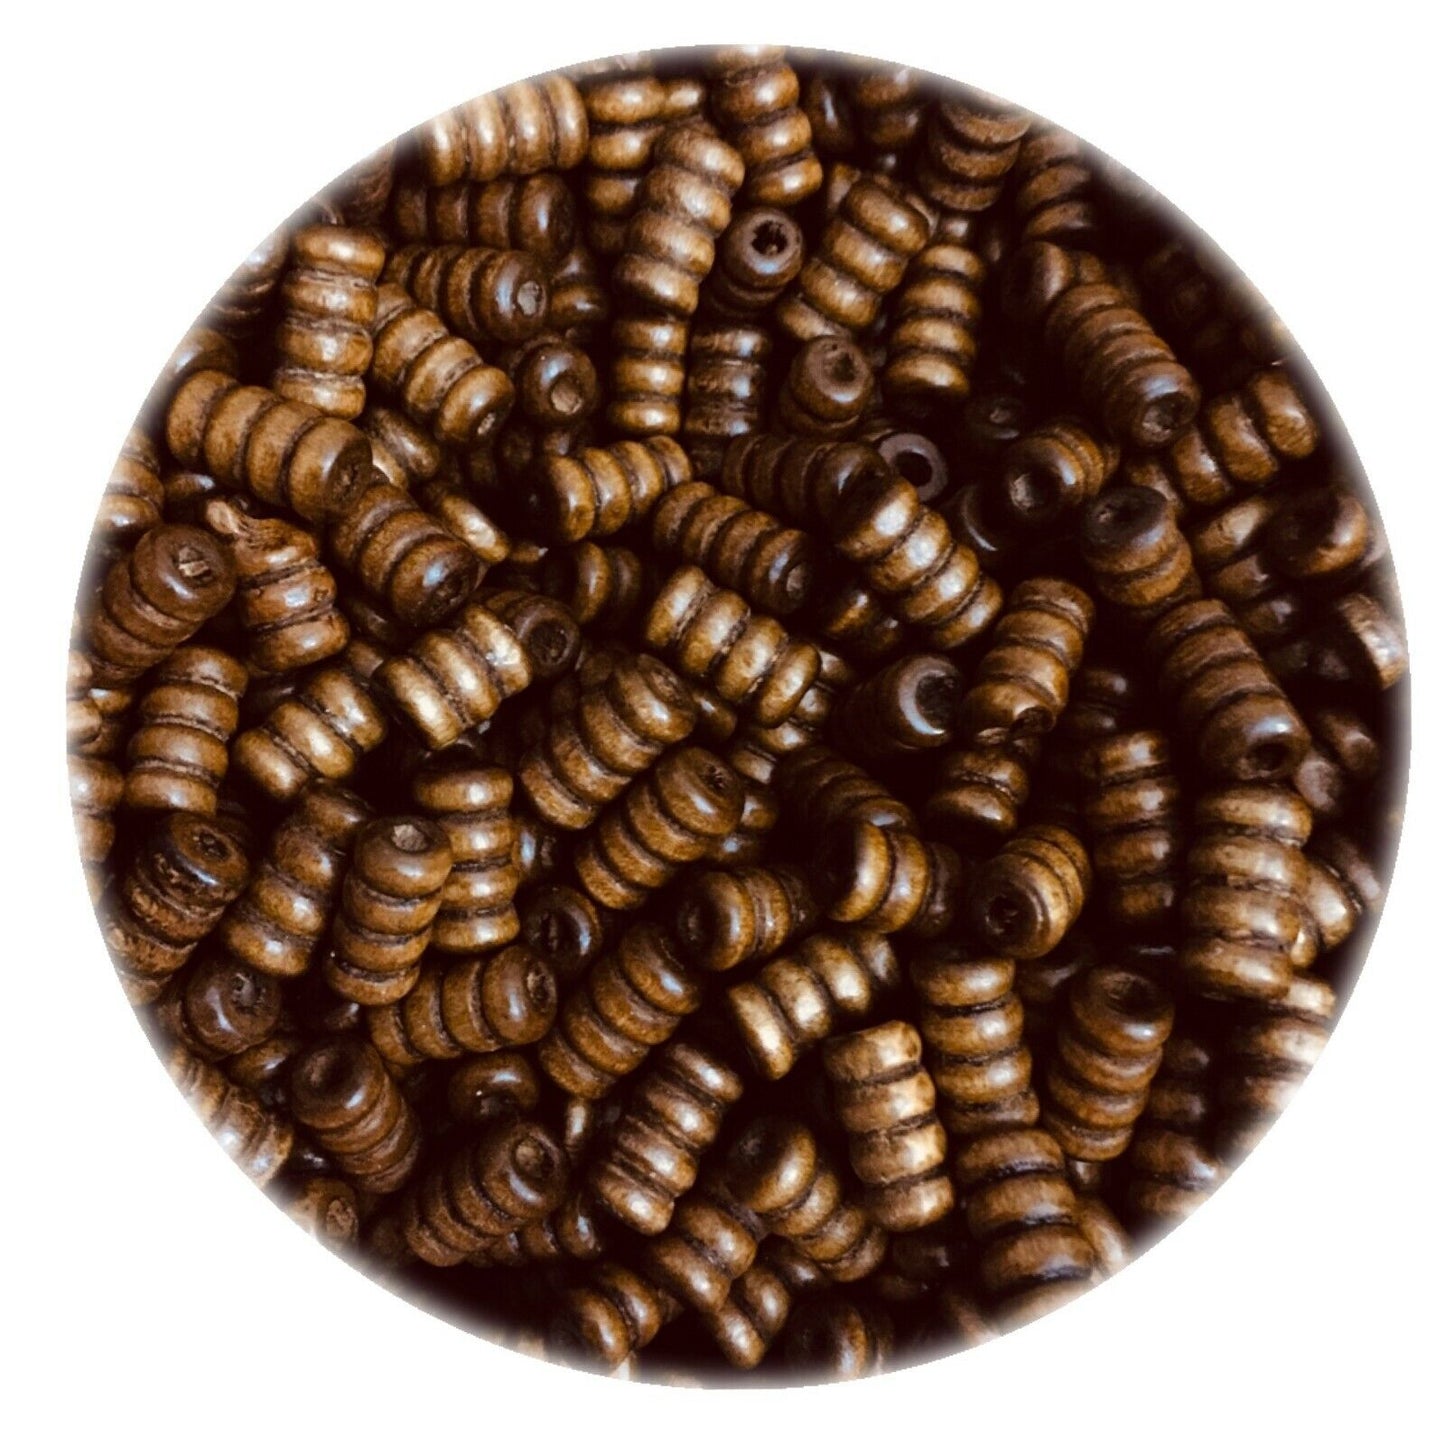 100x Curvy Spiralled Wooden Tube Beads 12x7mm